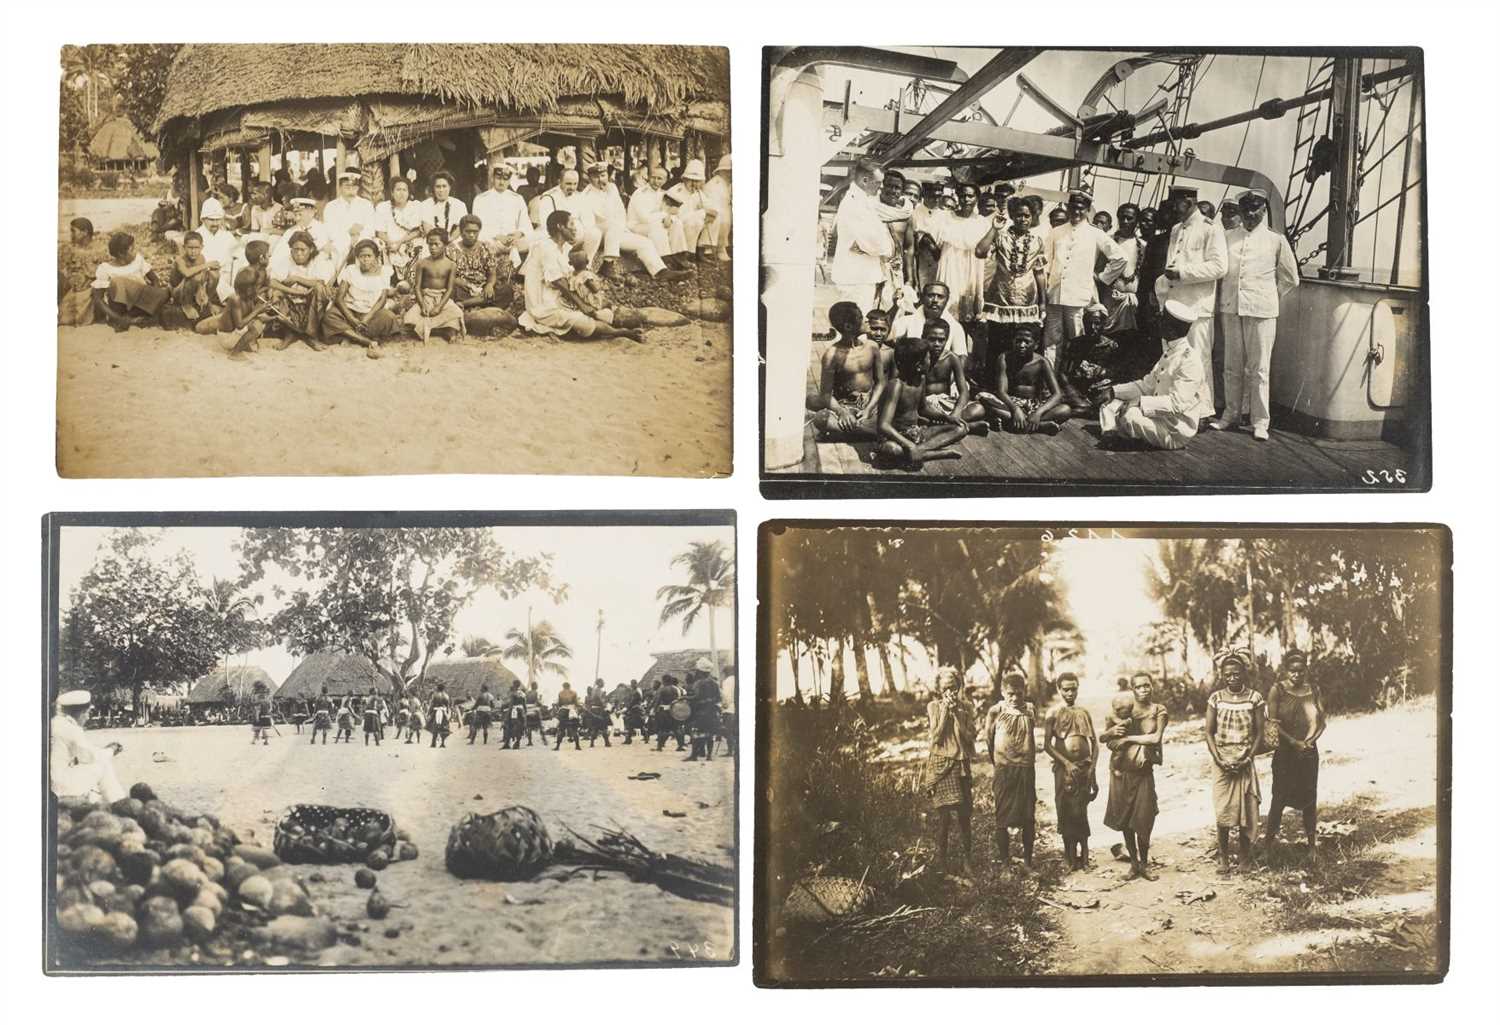 Lot 174 - German Samoa & New Guinea. A group of 29 gelatin silver printing-out paper prints, c. 1910